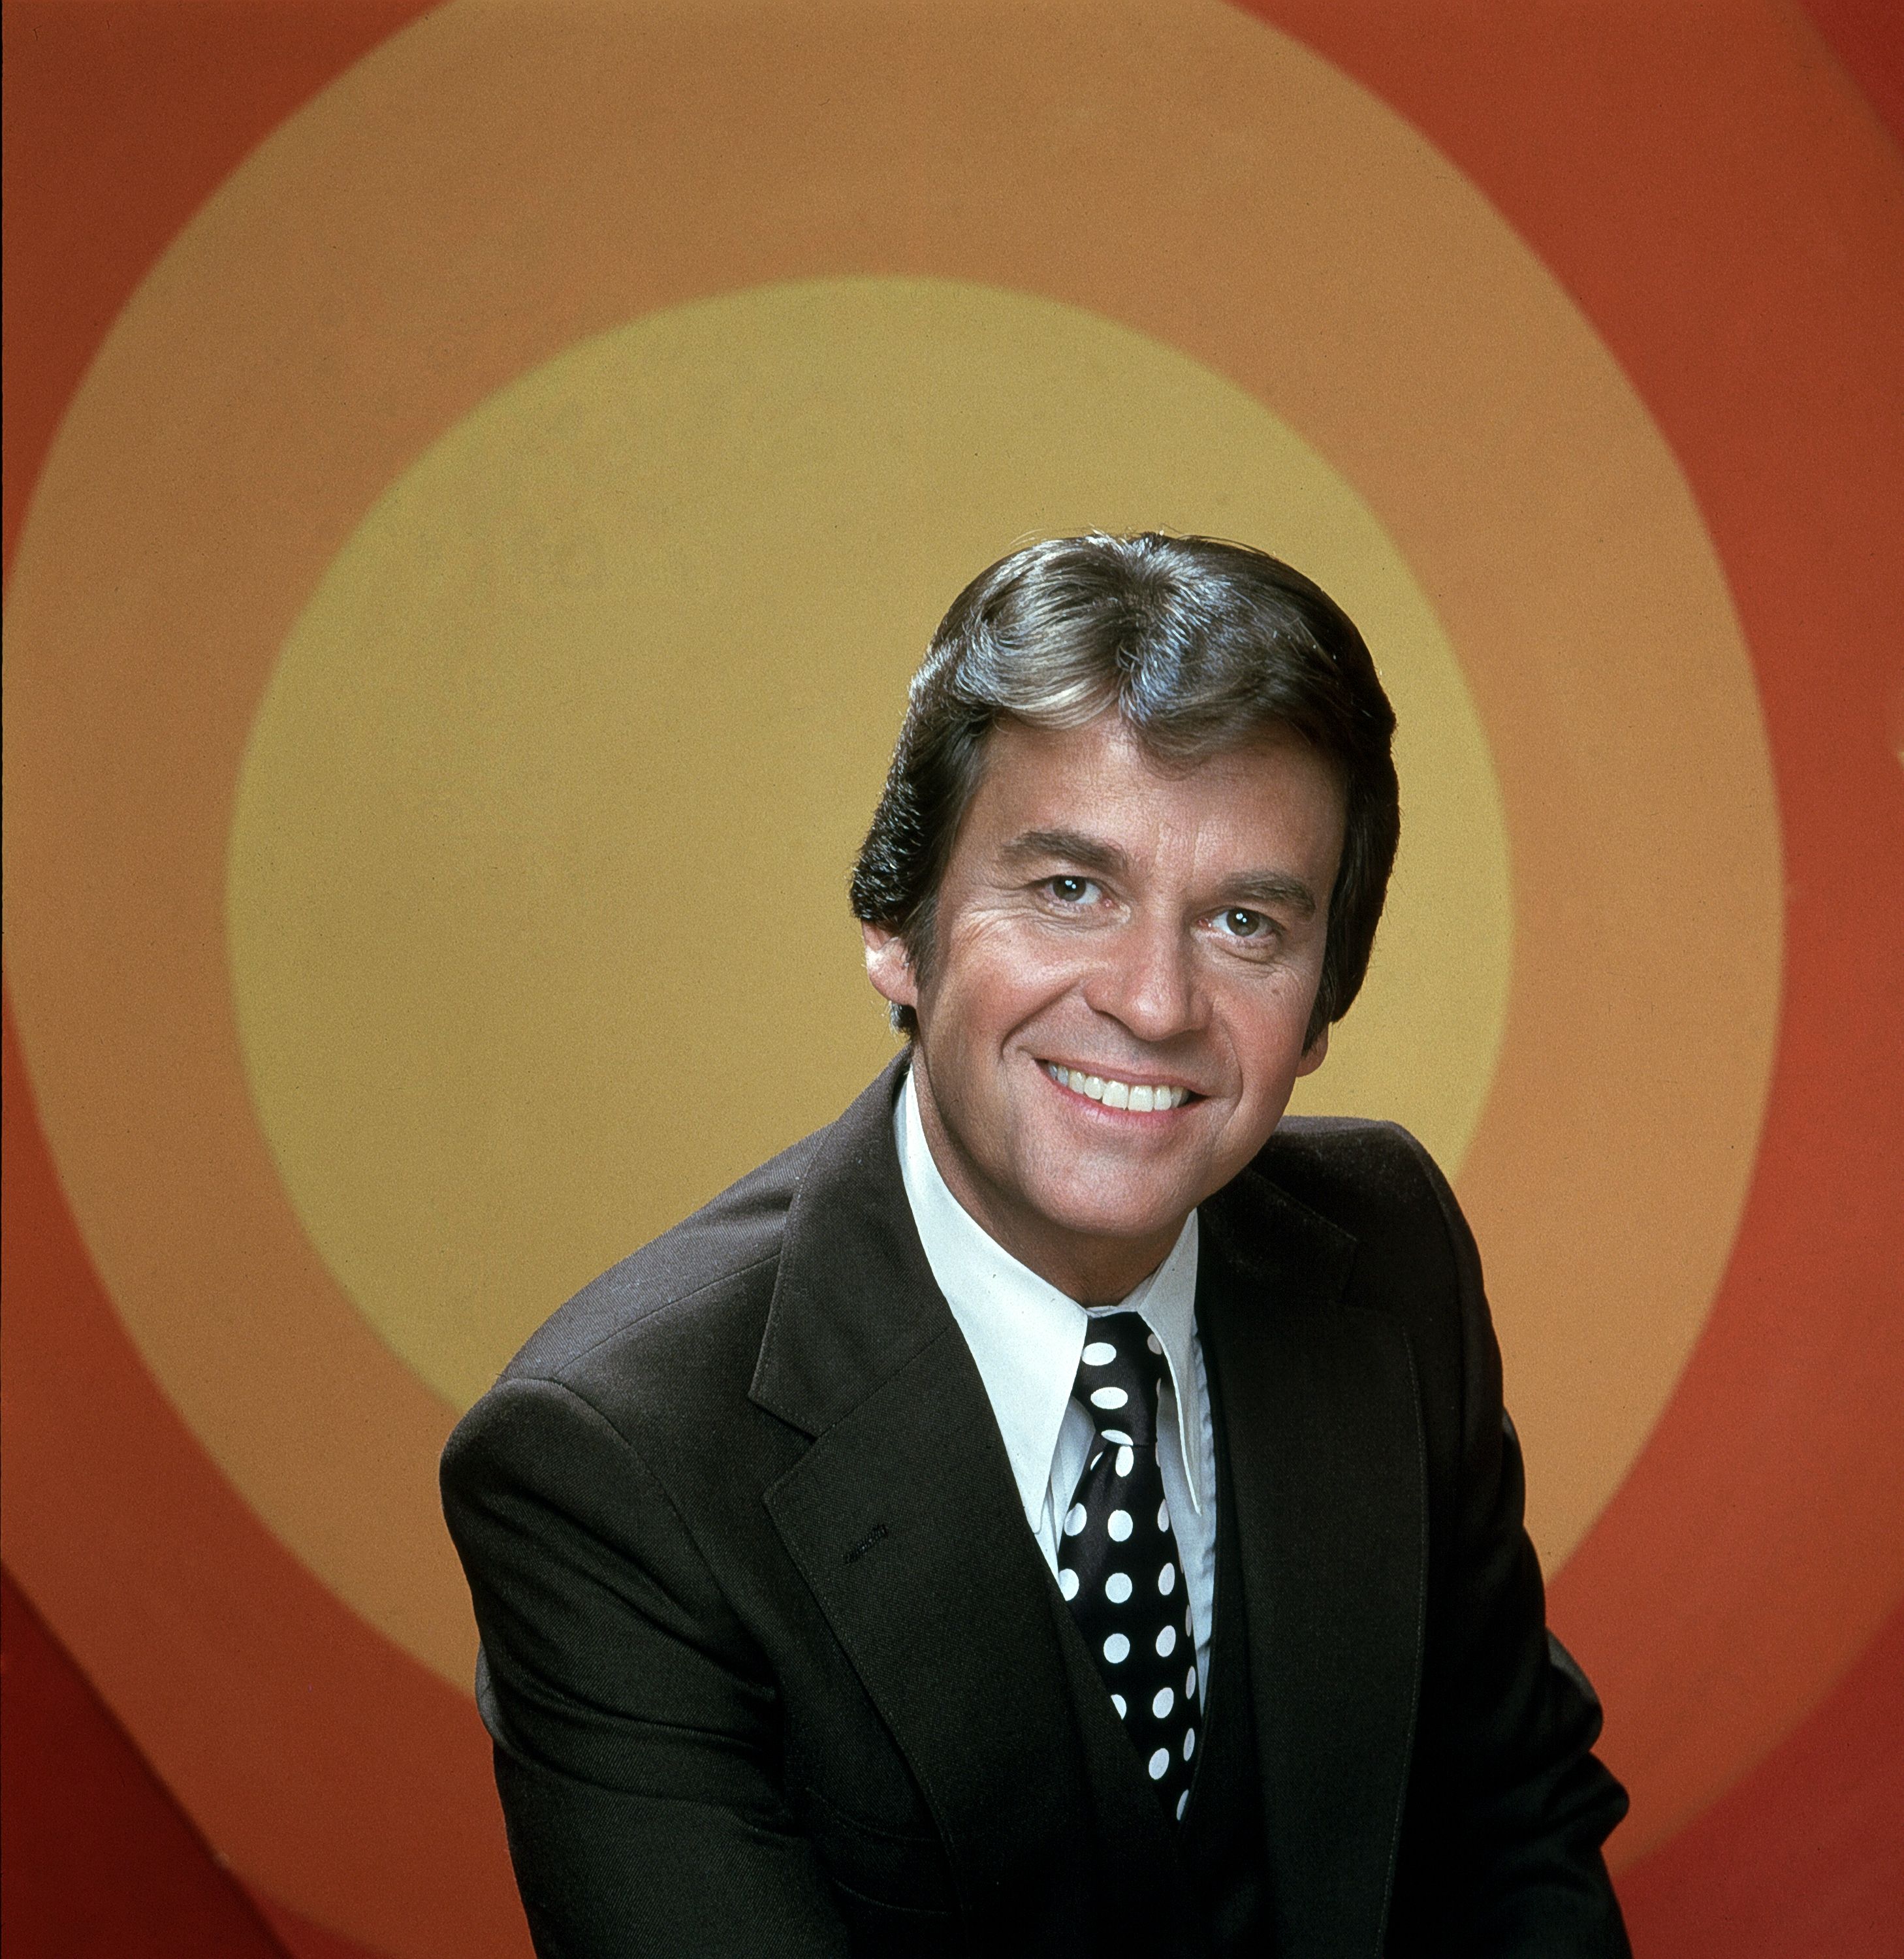 Dick Clark and His Many TV Shows - Slideshow